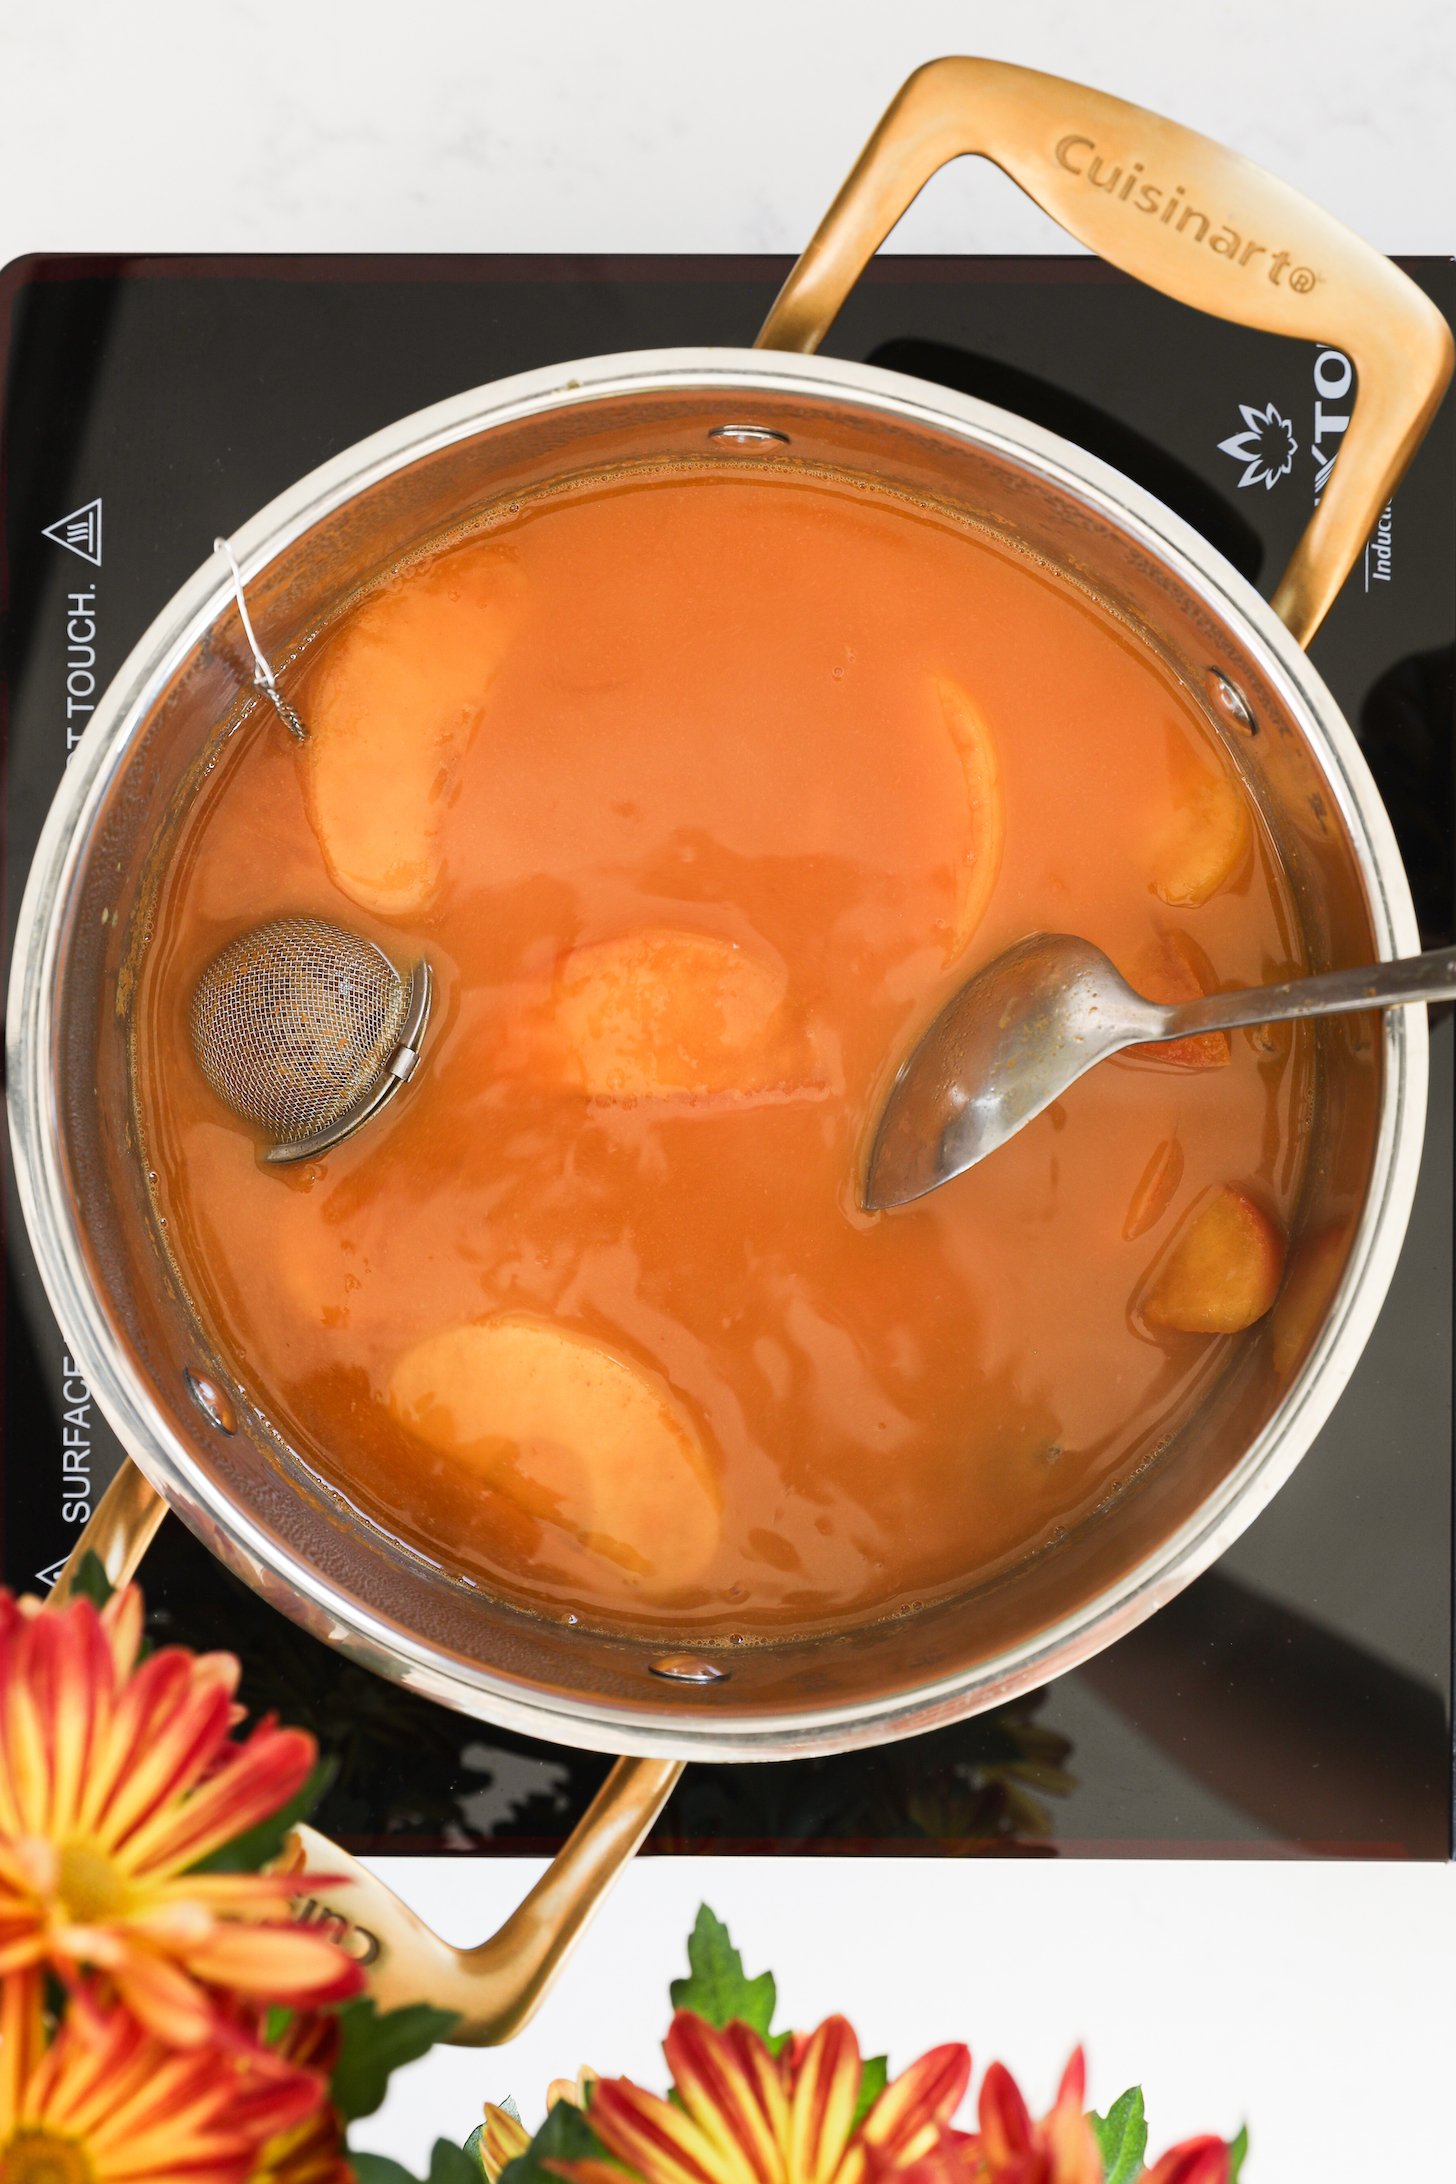 A cooking pot on a mobile cooktop holds apple cider and apple slices, with a stainless steel spice infuser and a submerged spoon.